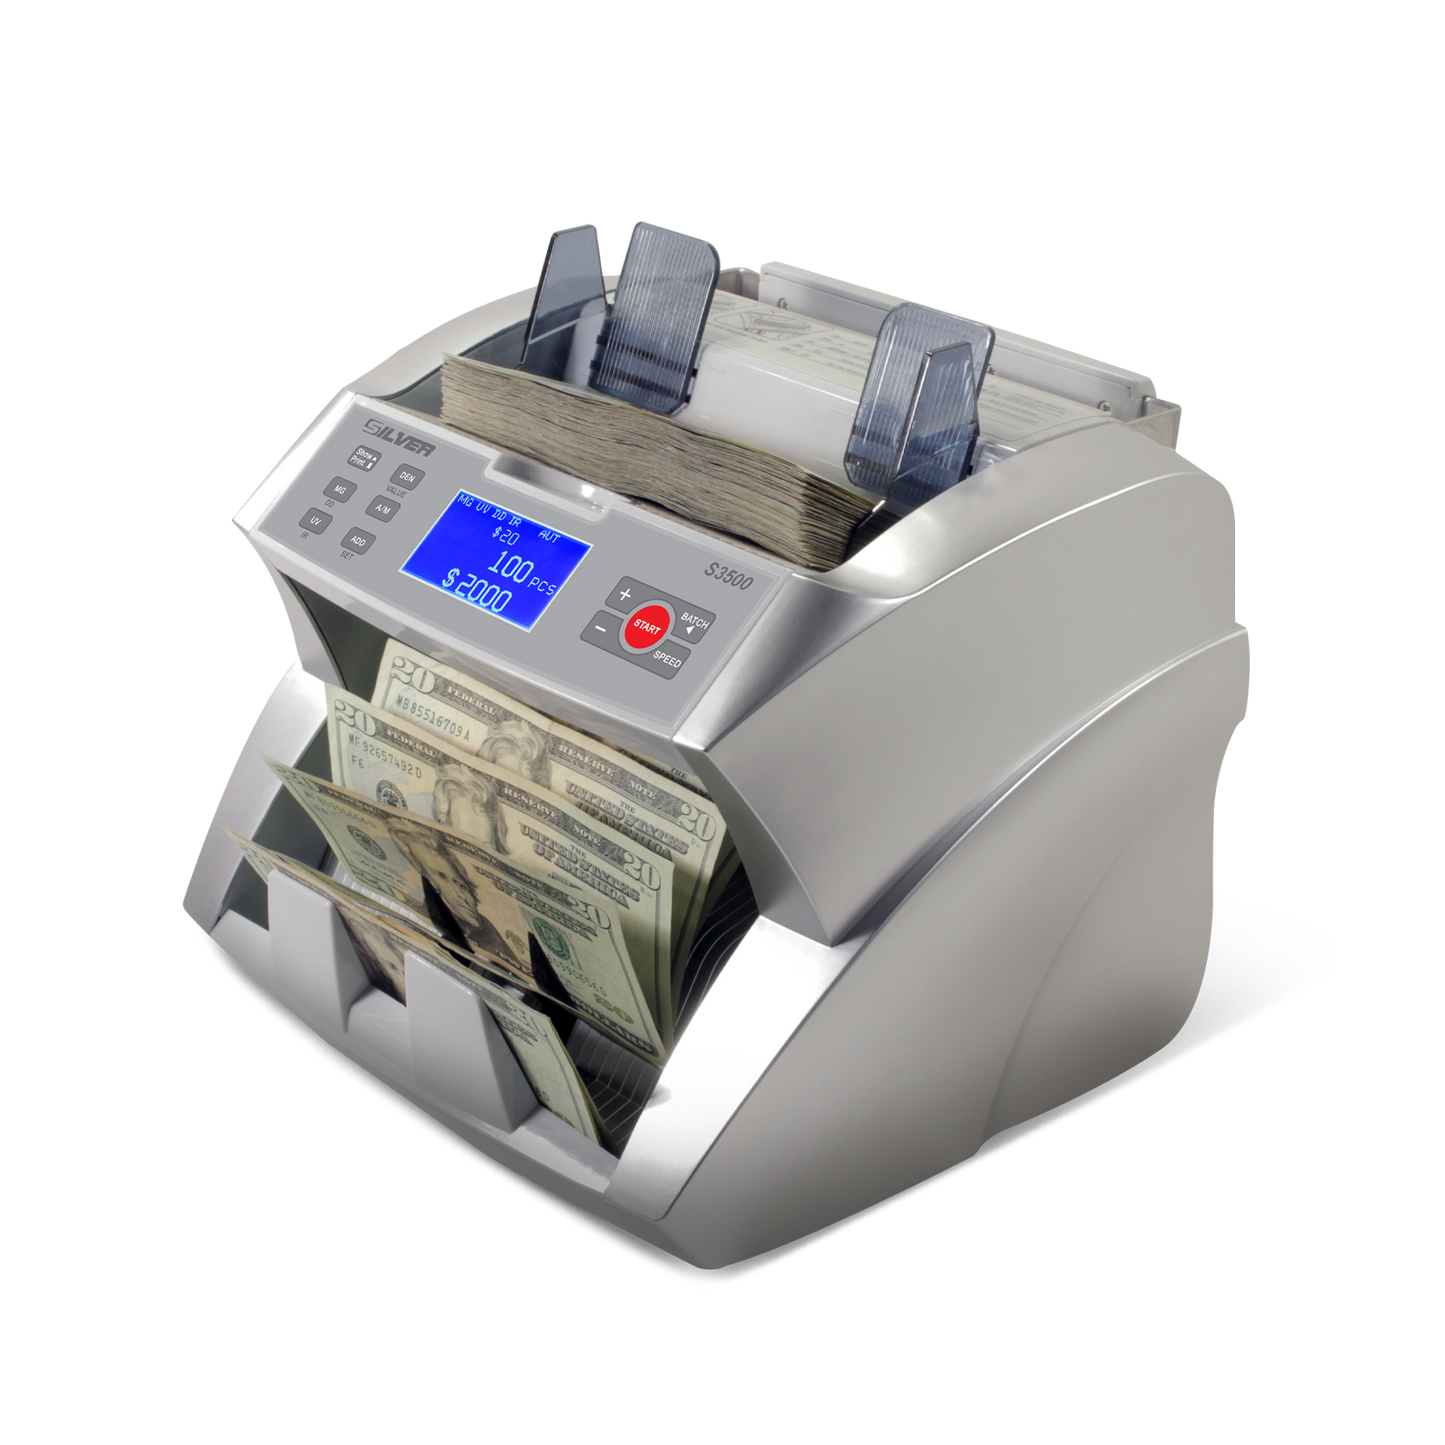 S3500 High Speed Bill Counter MGUV